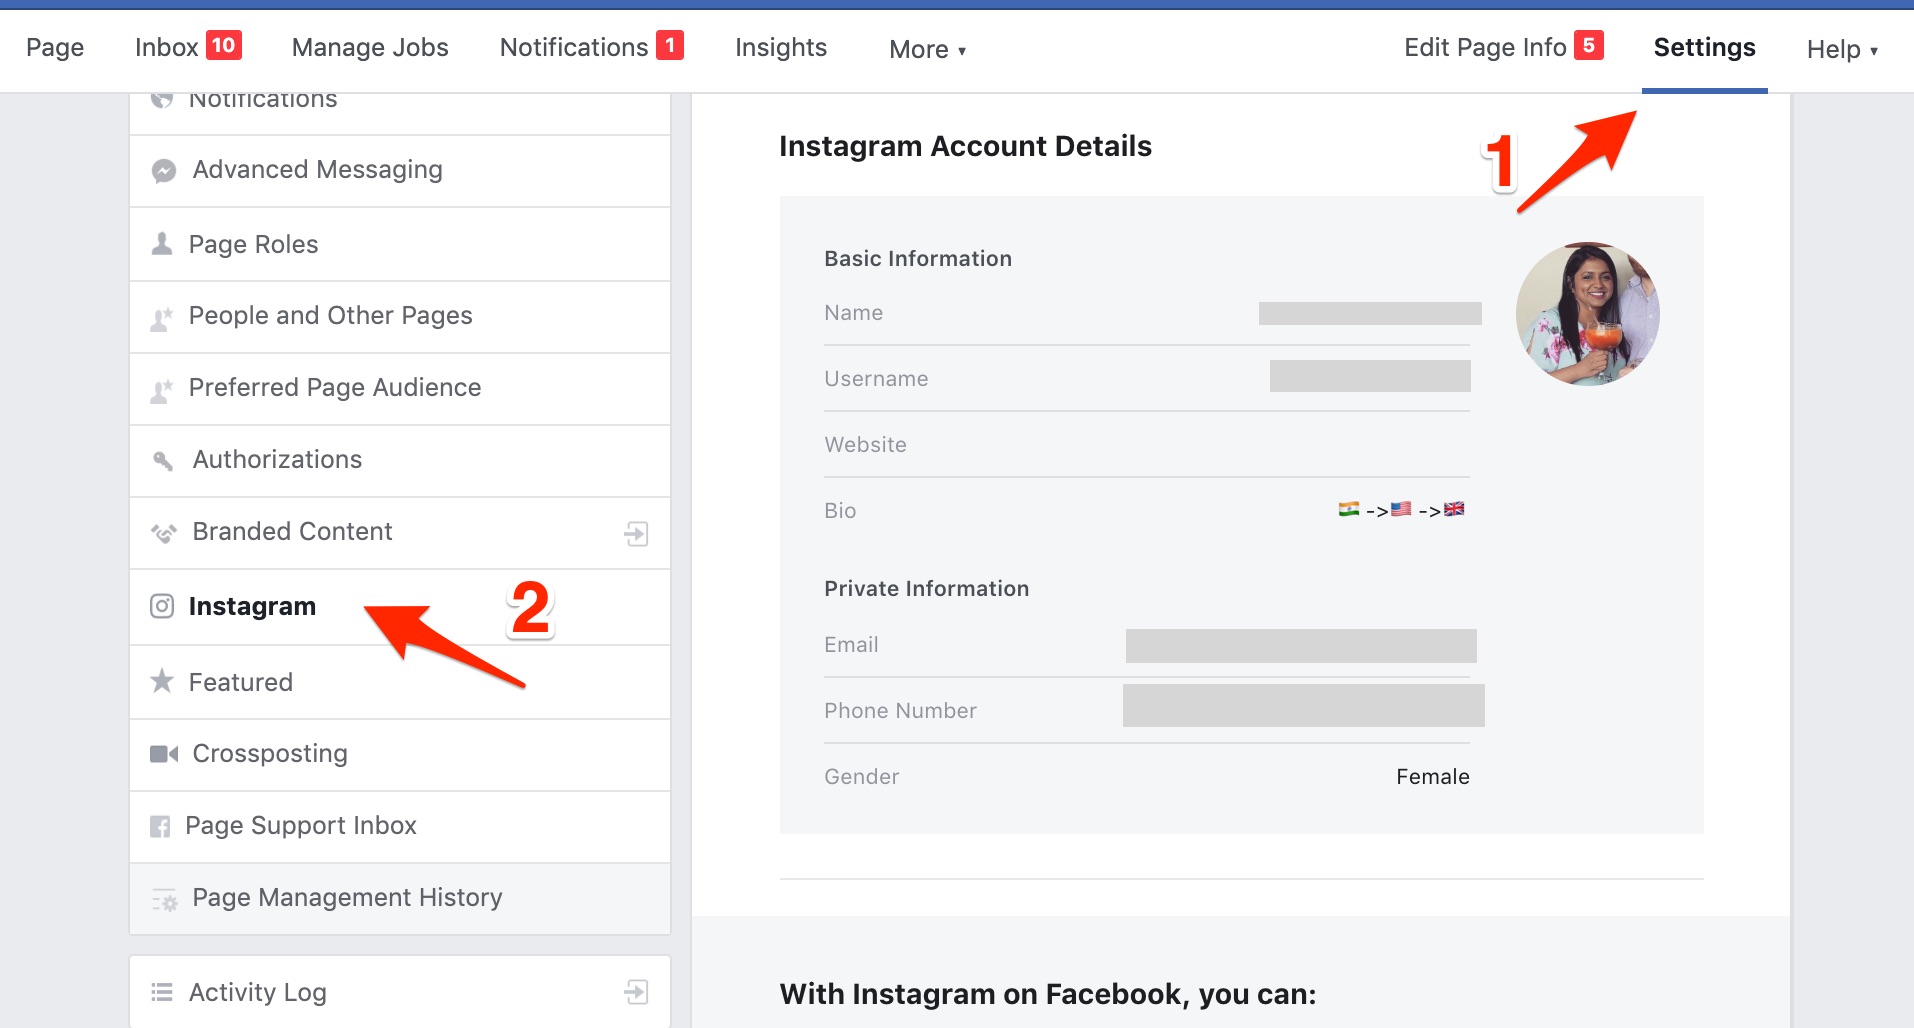 How to Connect Instagram to Facebook